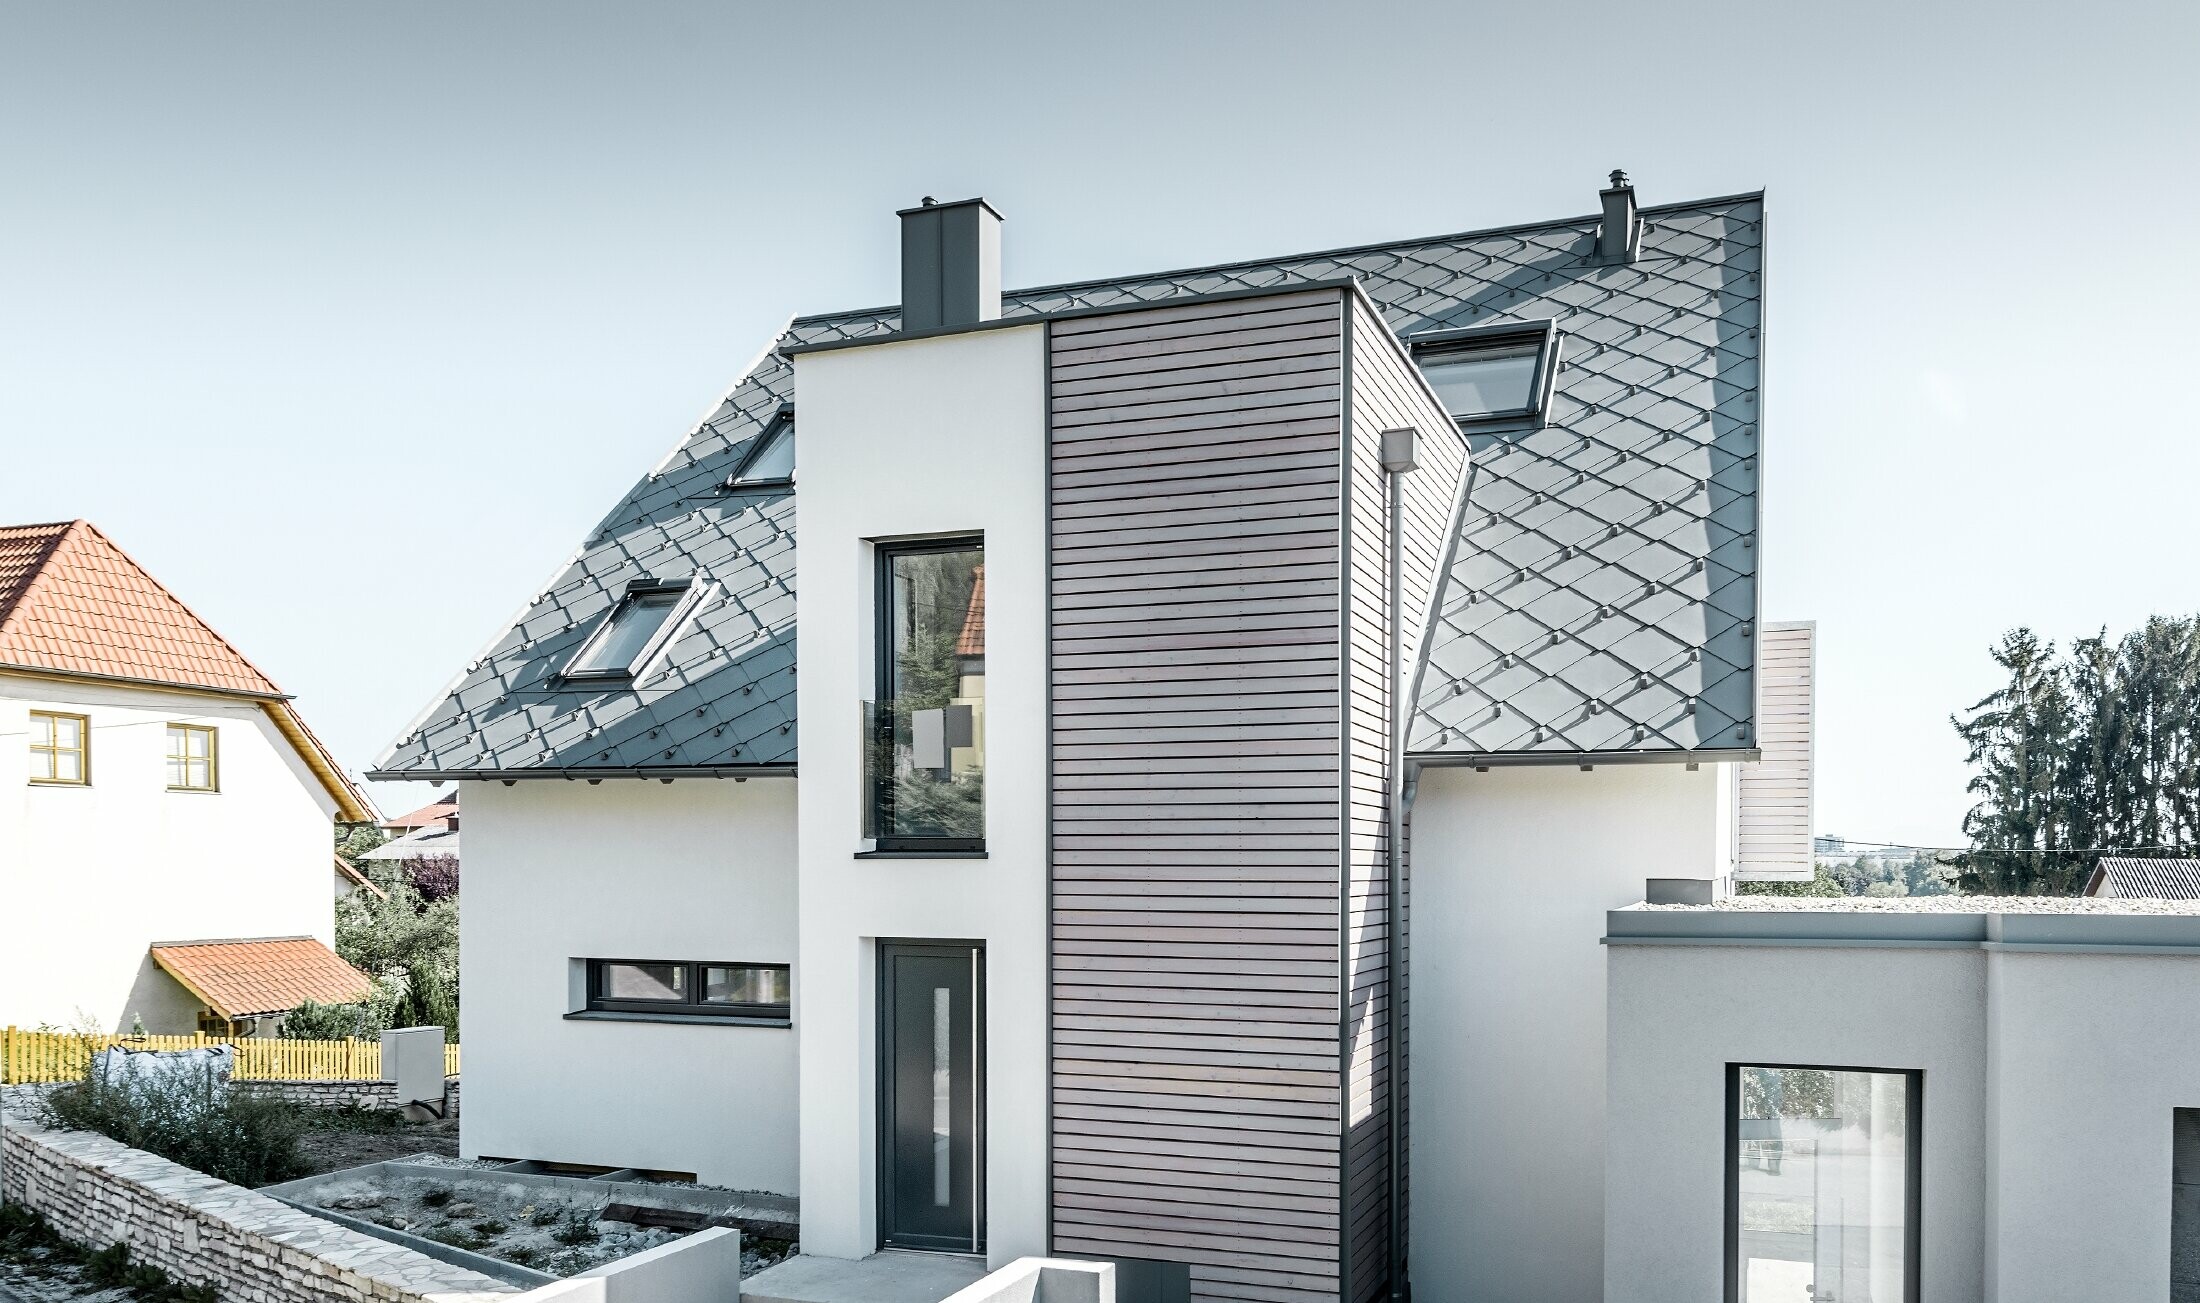 The detached house with gabled roof in Leonding was completely refurbished. The roof area was covered with the PREFA 44 x 44 rhomboid roof tiles in light grey, including snow guards. The PREFA hanging gutter, also in light grey, was used for the guttering. 